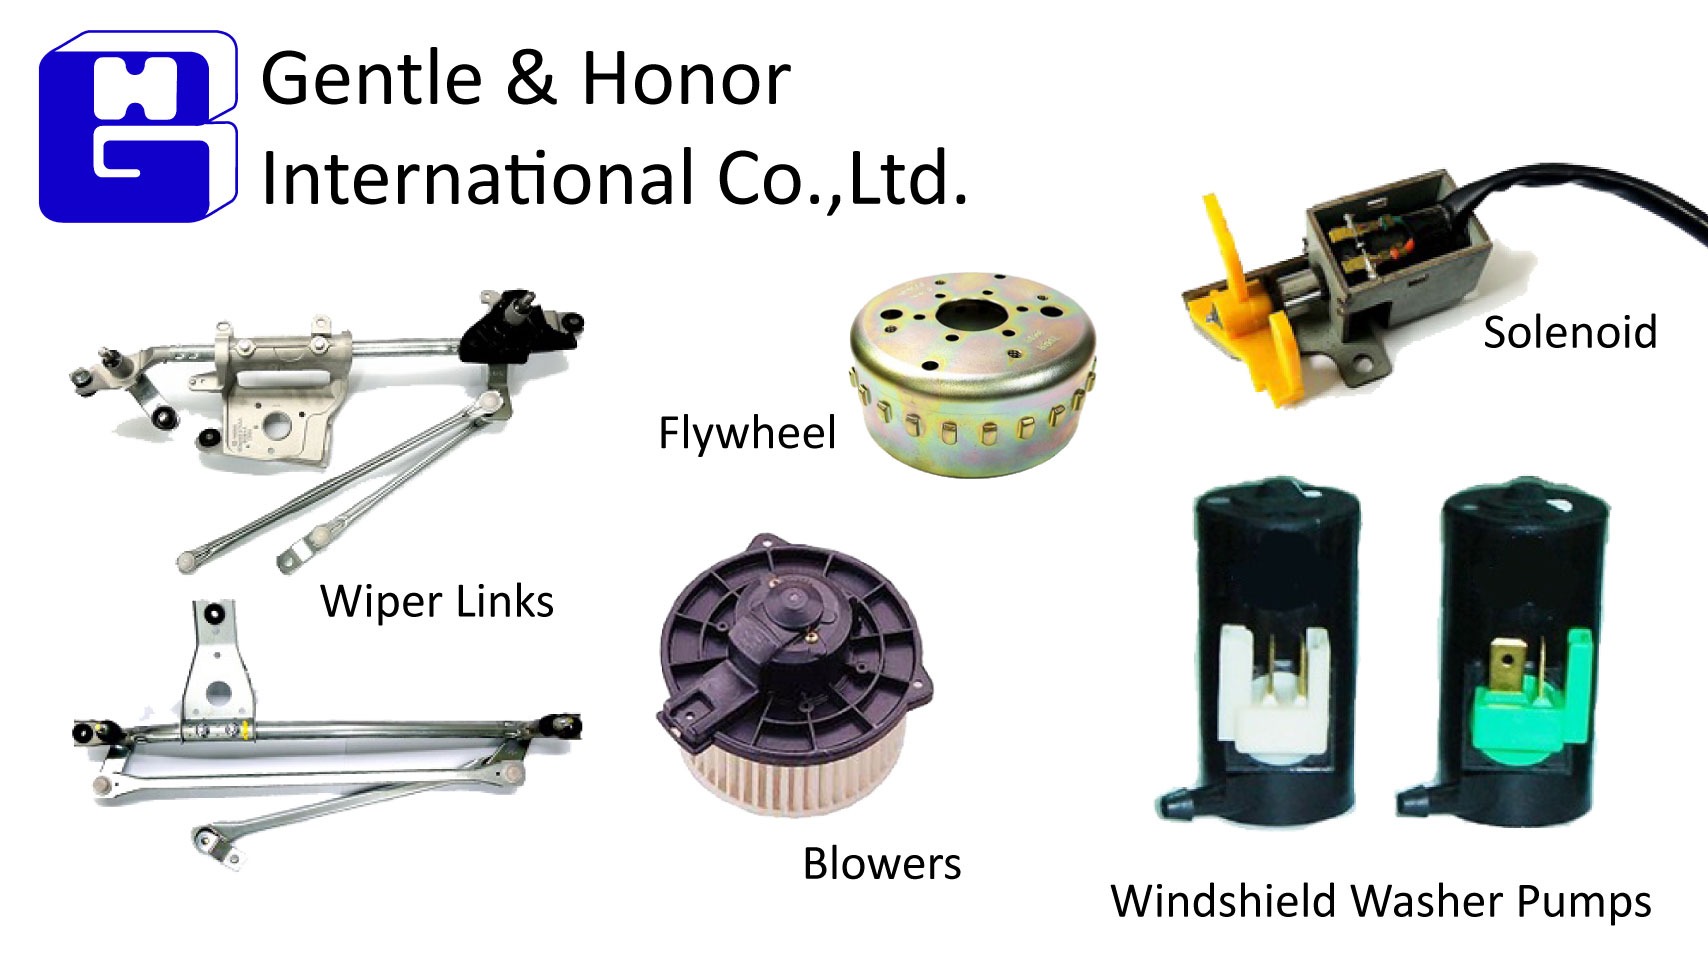 Wiper Links, Flywheel, Blowers, Solenoid, Windshield Washer Pumps for Electrical Parts made by Gentle & Honor International Co., LTD.　信睦股份有限公司 – MatchSupplier.com